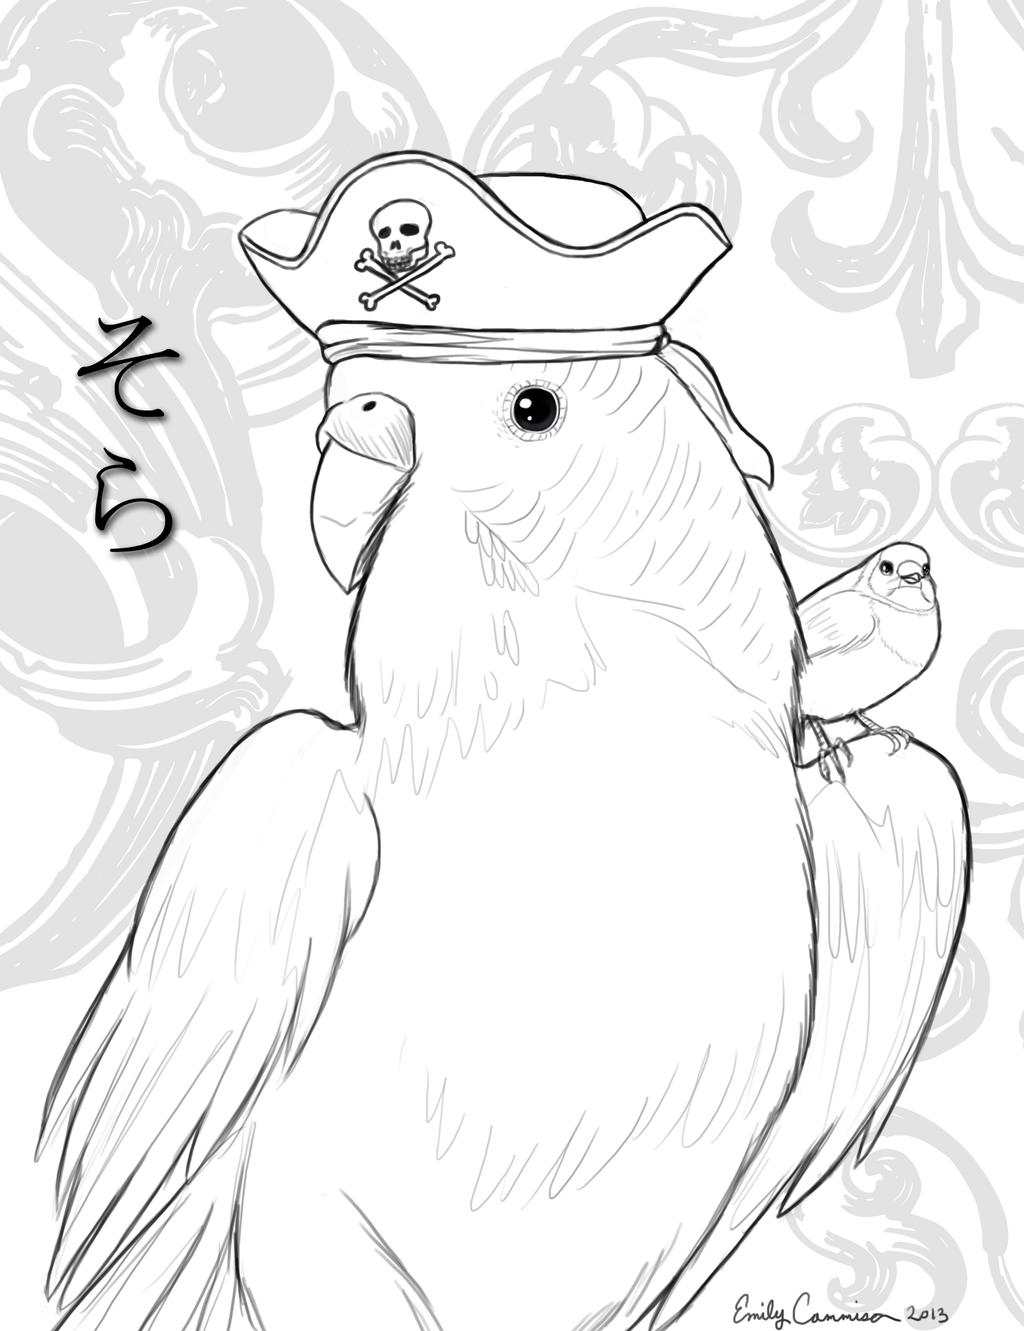 Sky the Budgie Lineart (non-anime)